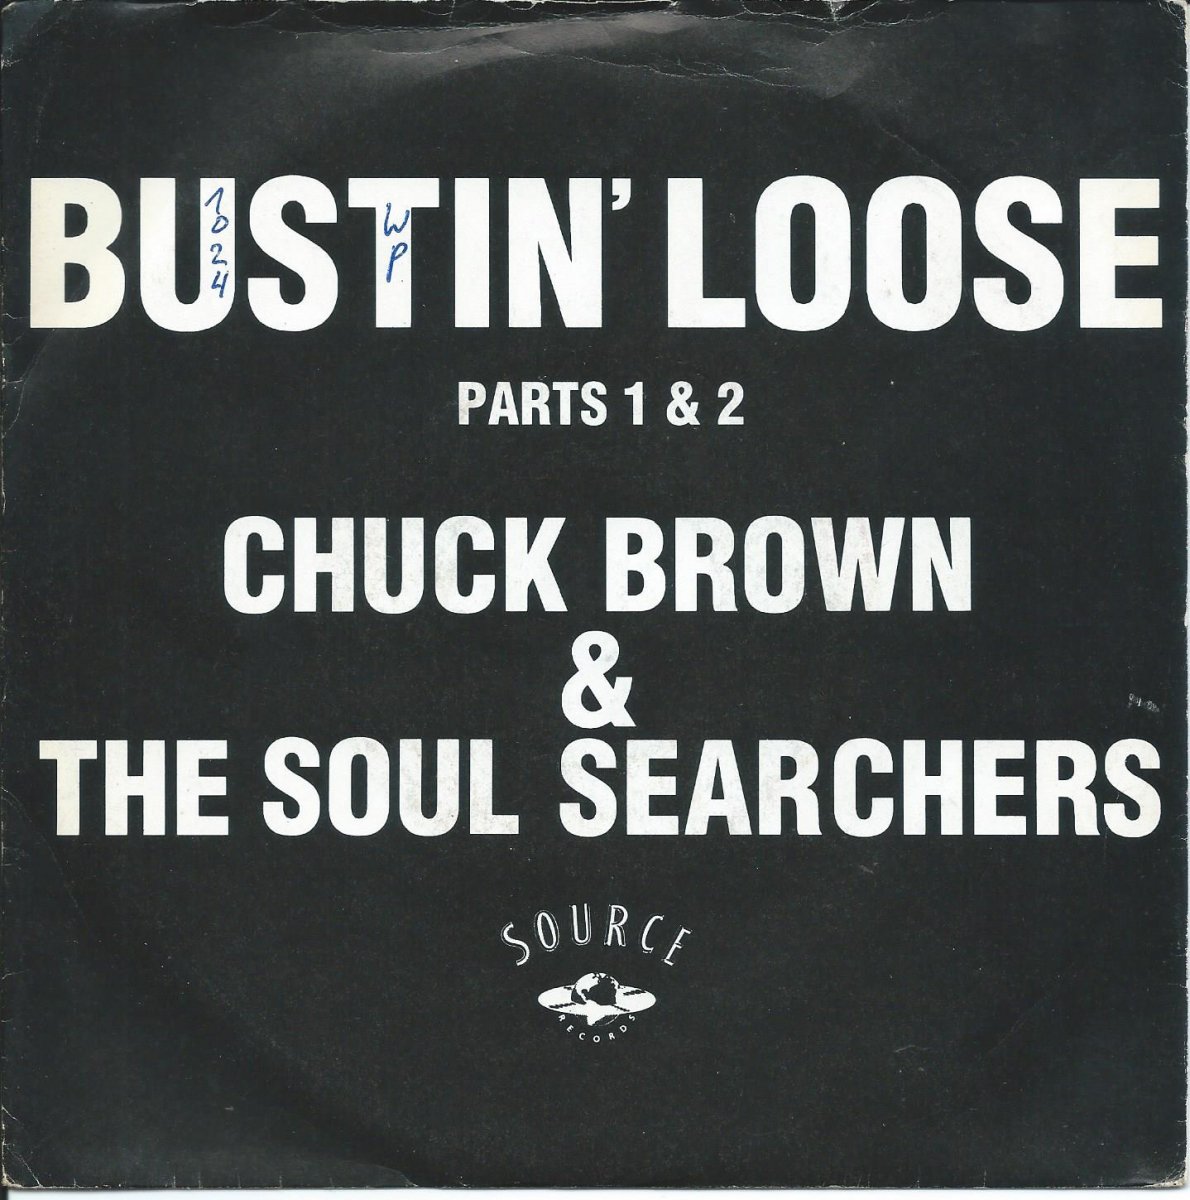 CHUCK BROWN & THE SOUL SEARCHERS ‎/ BUSTIN' LOOSE (PARTS 1 & 2) (7